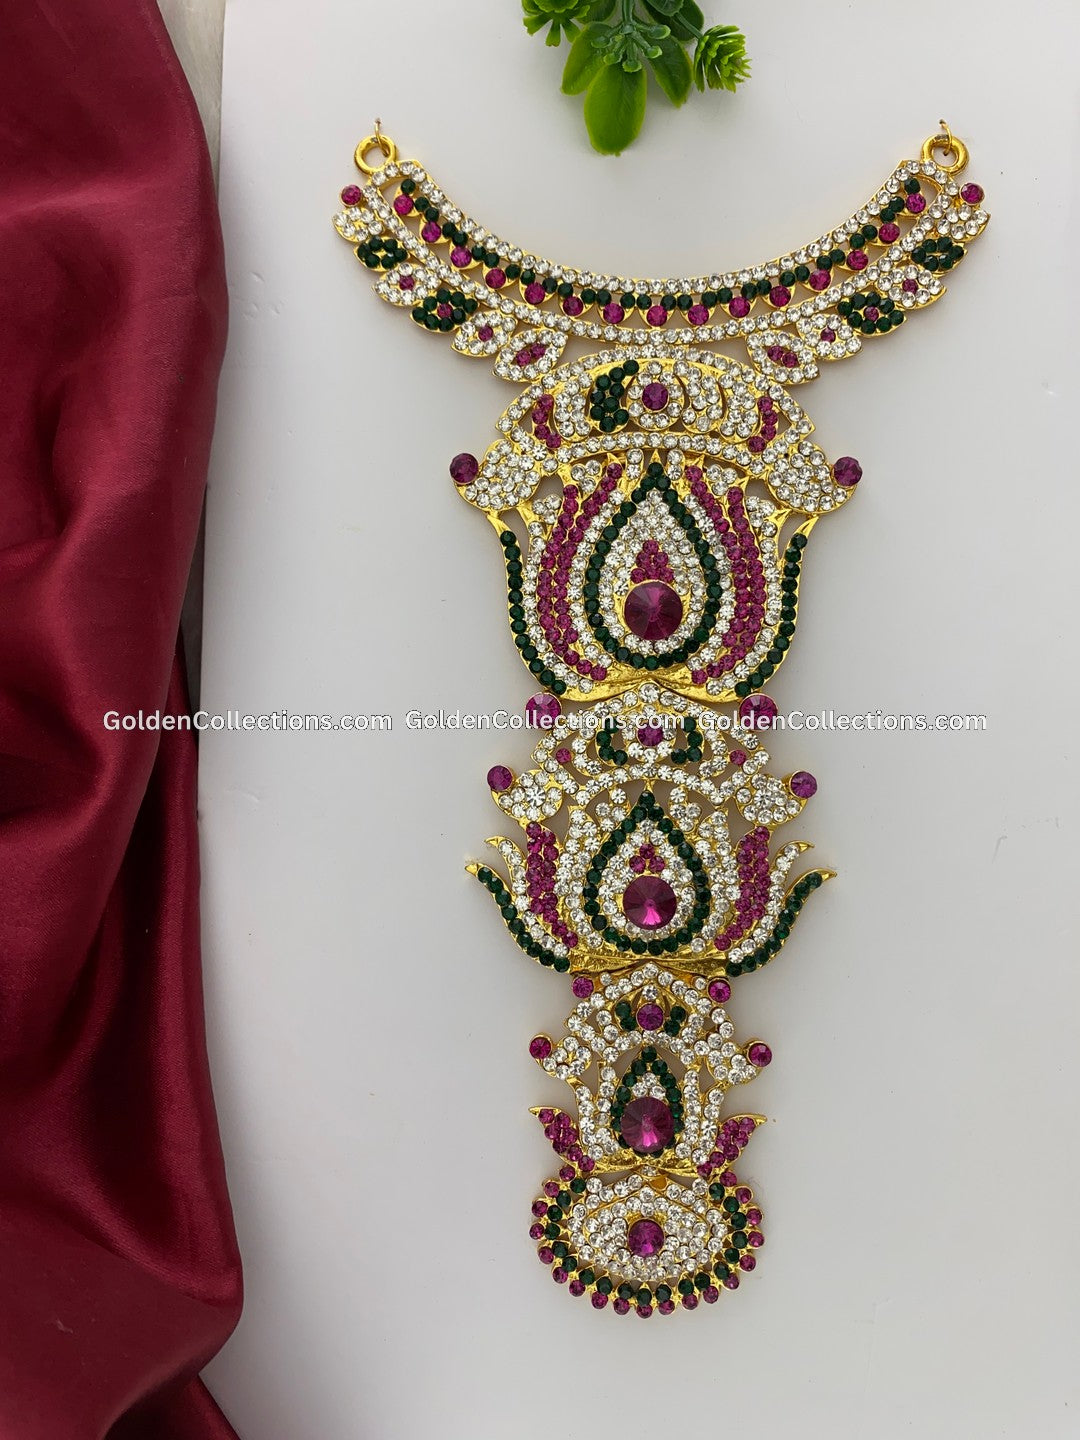 Shop now for Deity Jewellery - GoldenCollections DLN-039